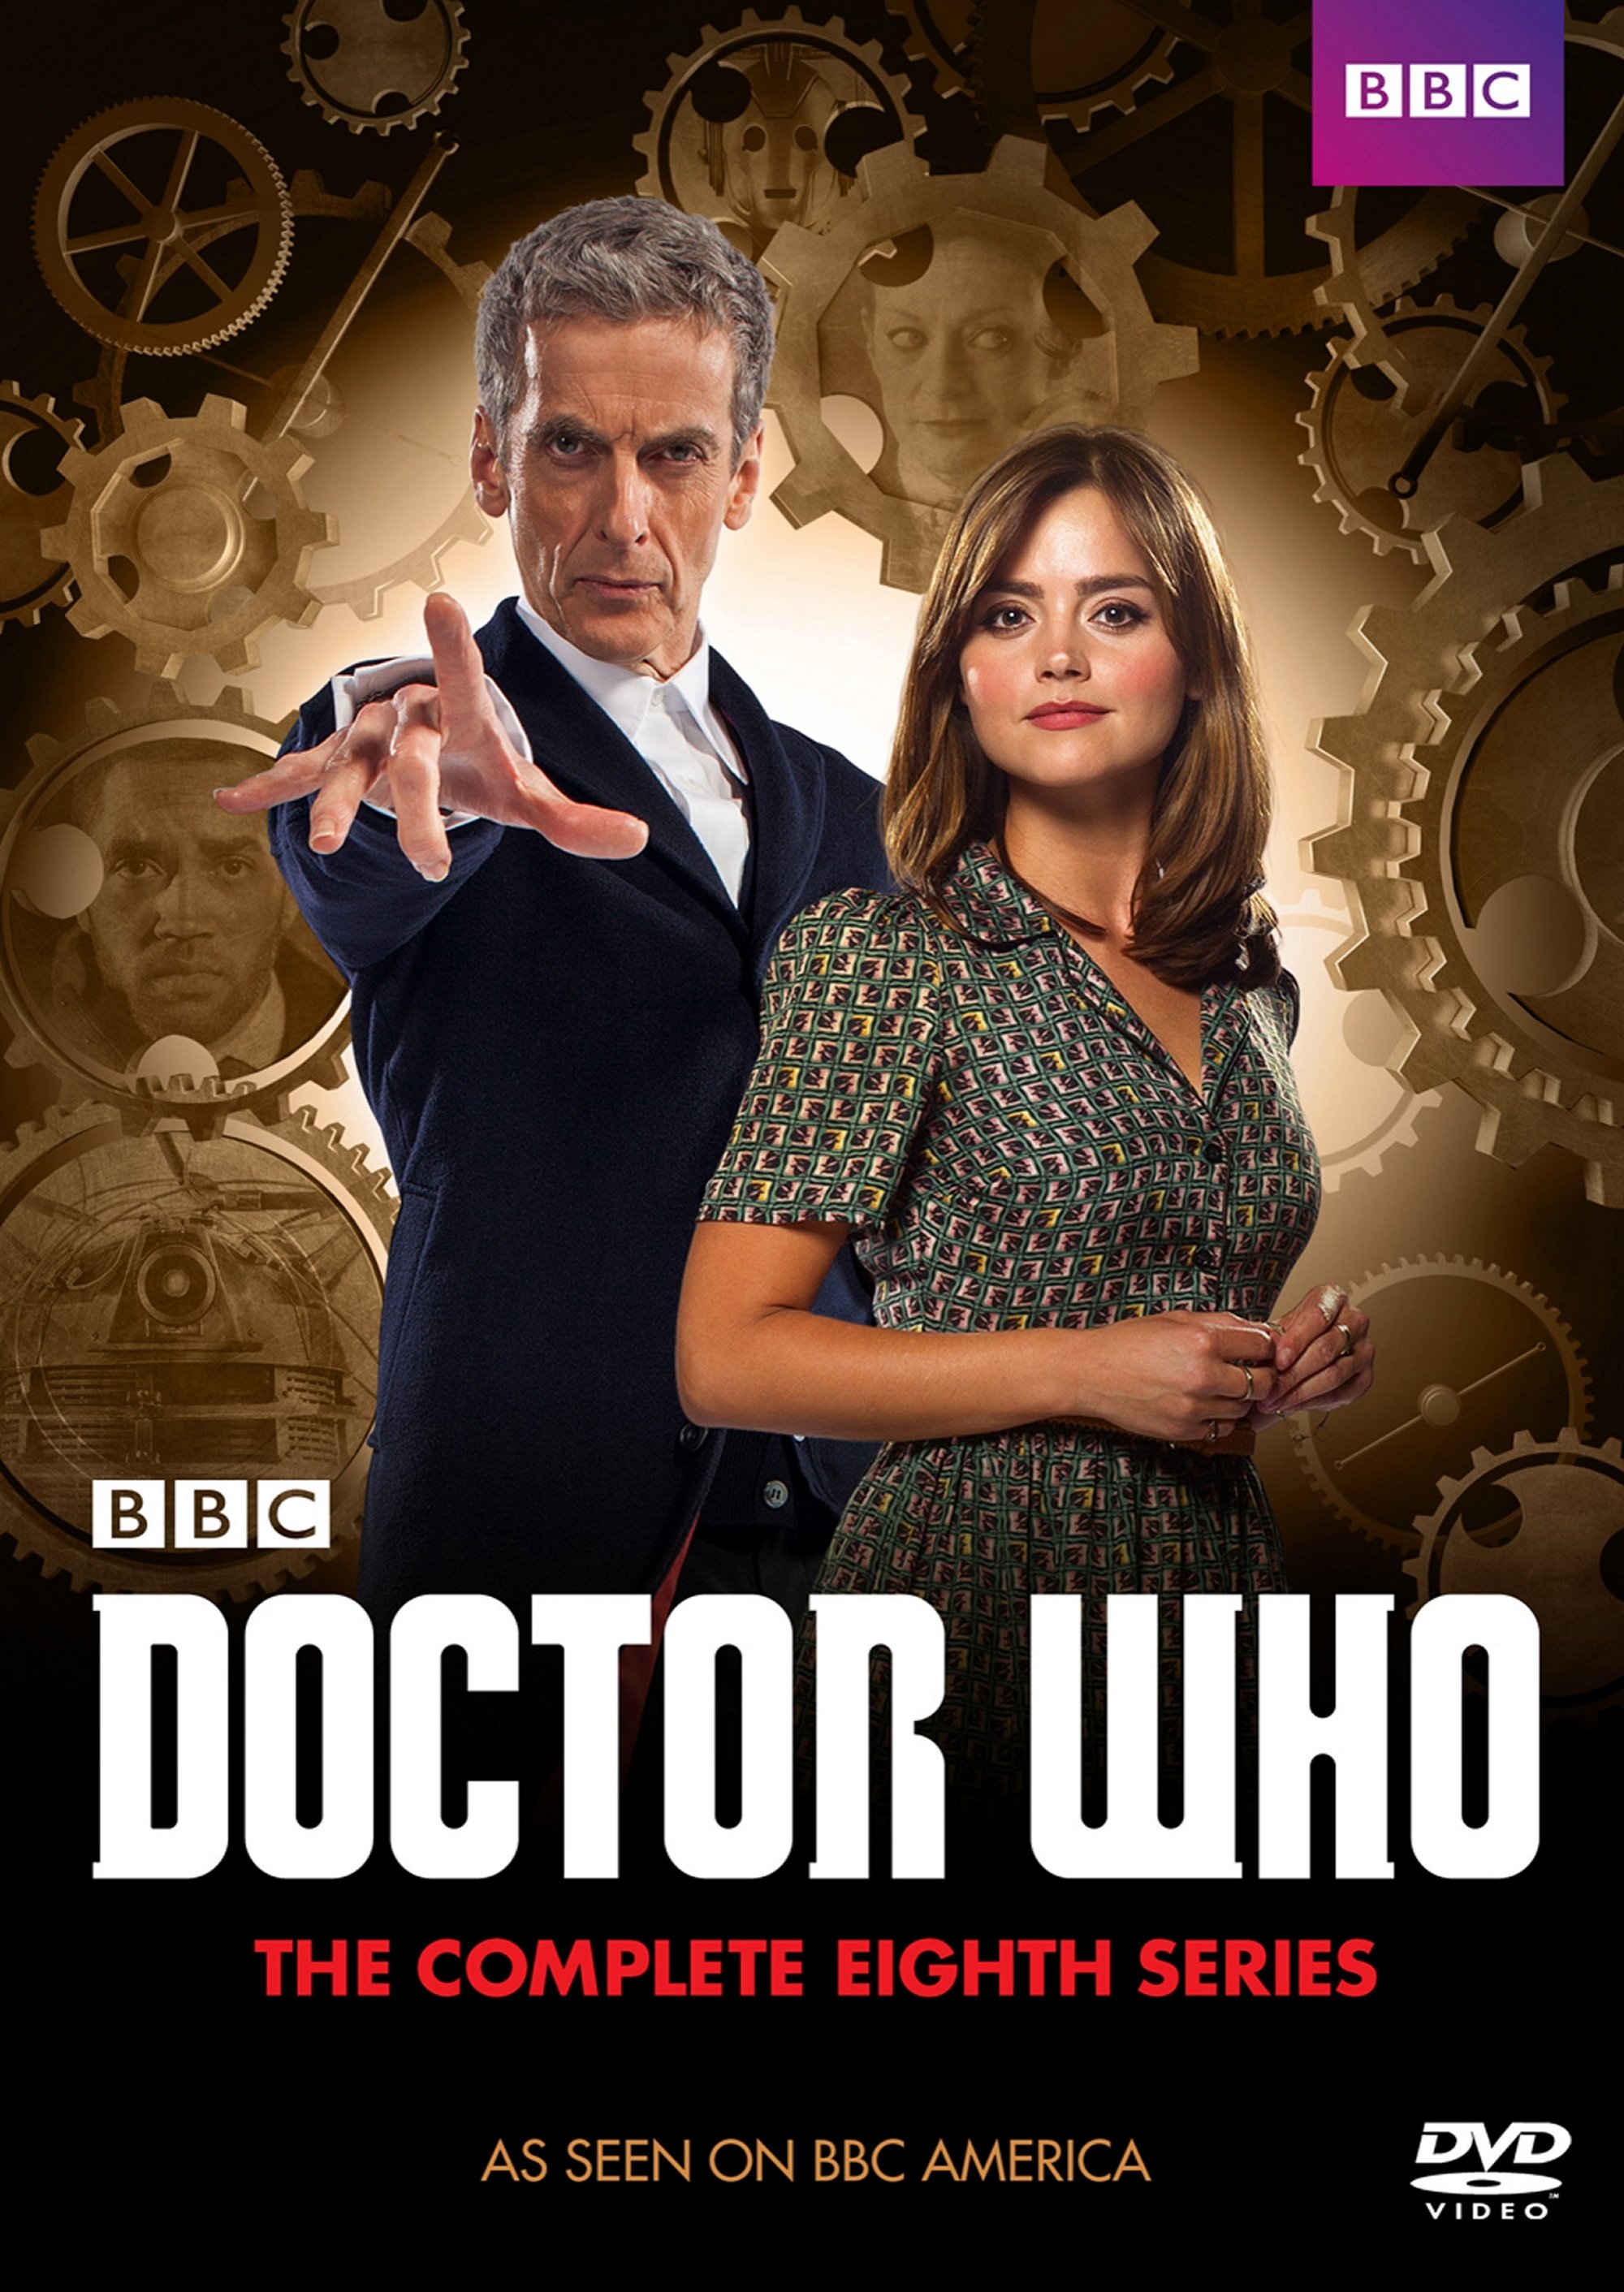 Doctor Who: The Complete Eighth Series - DVD [ 2014 ]